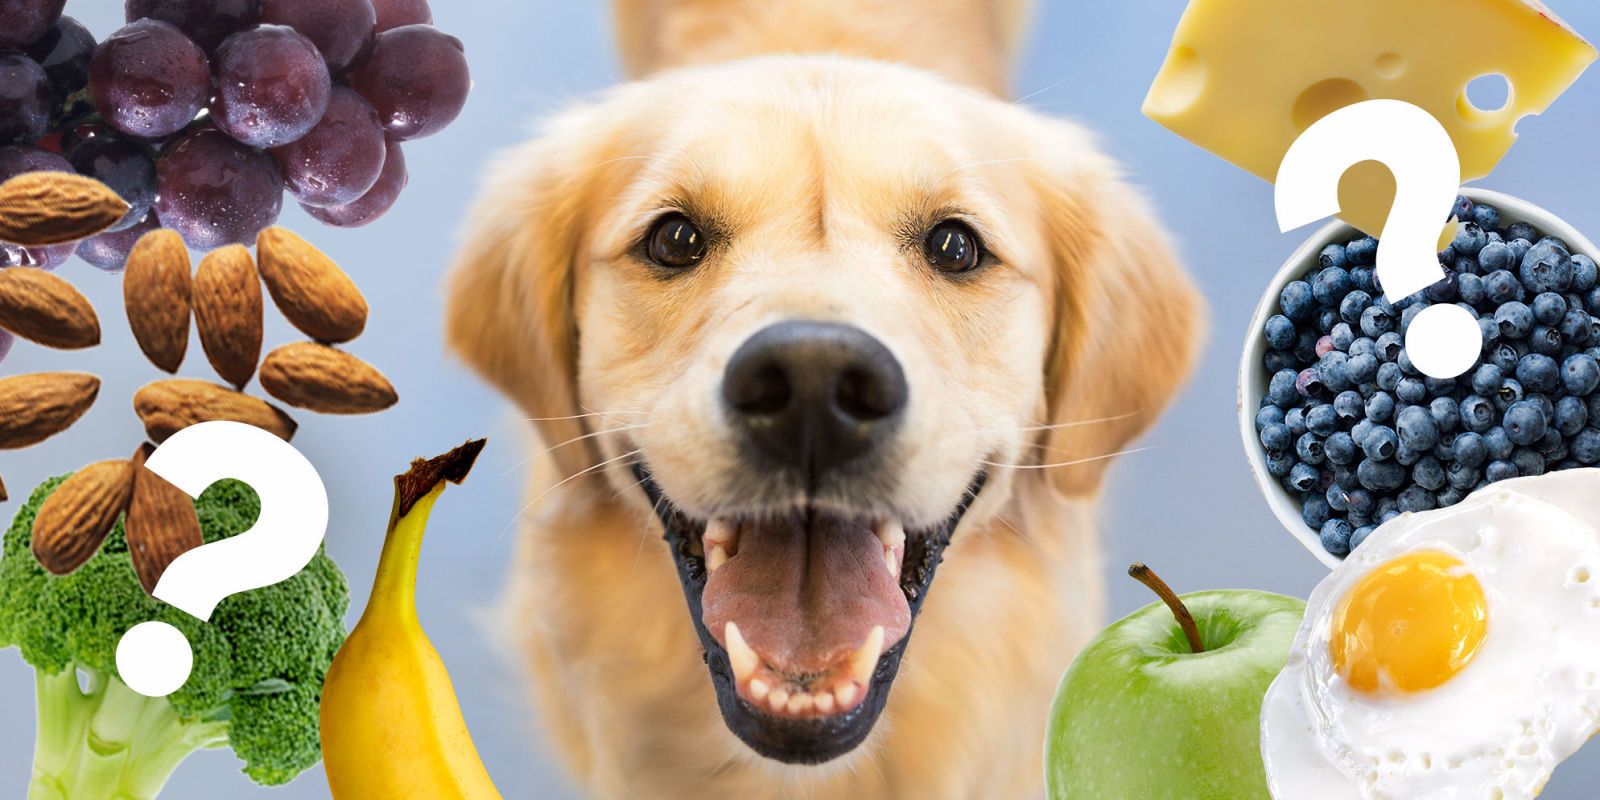 can puppies eat grapes